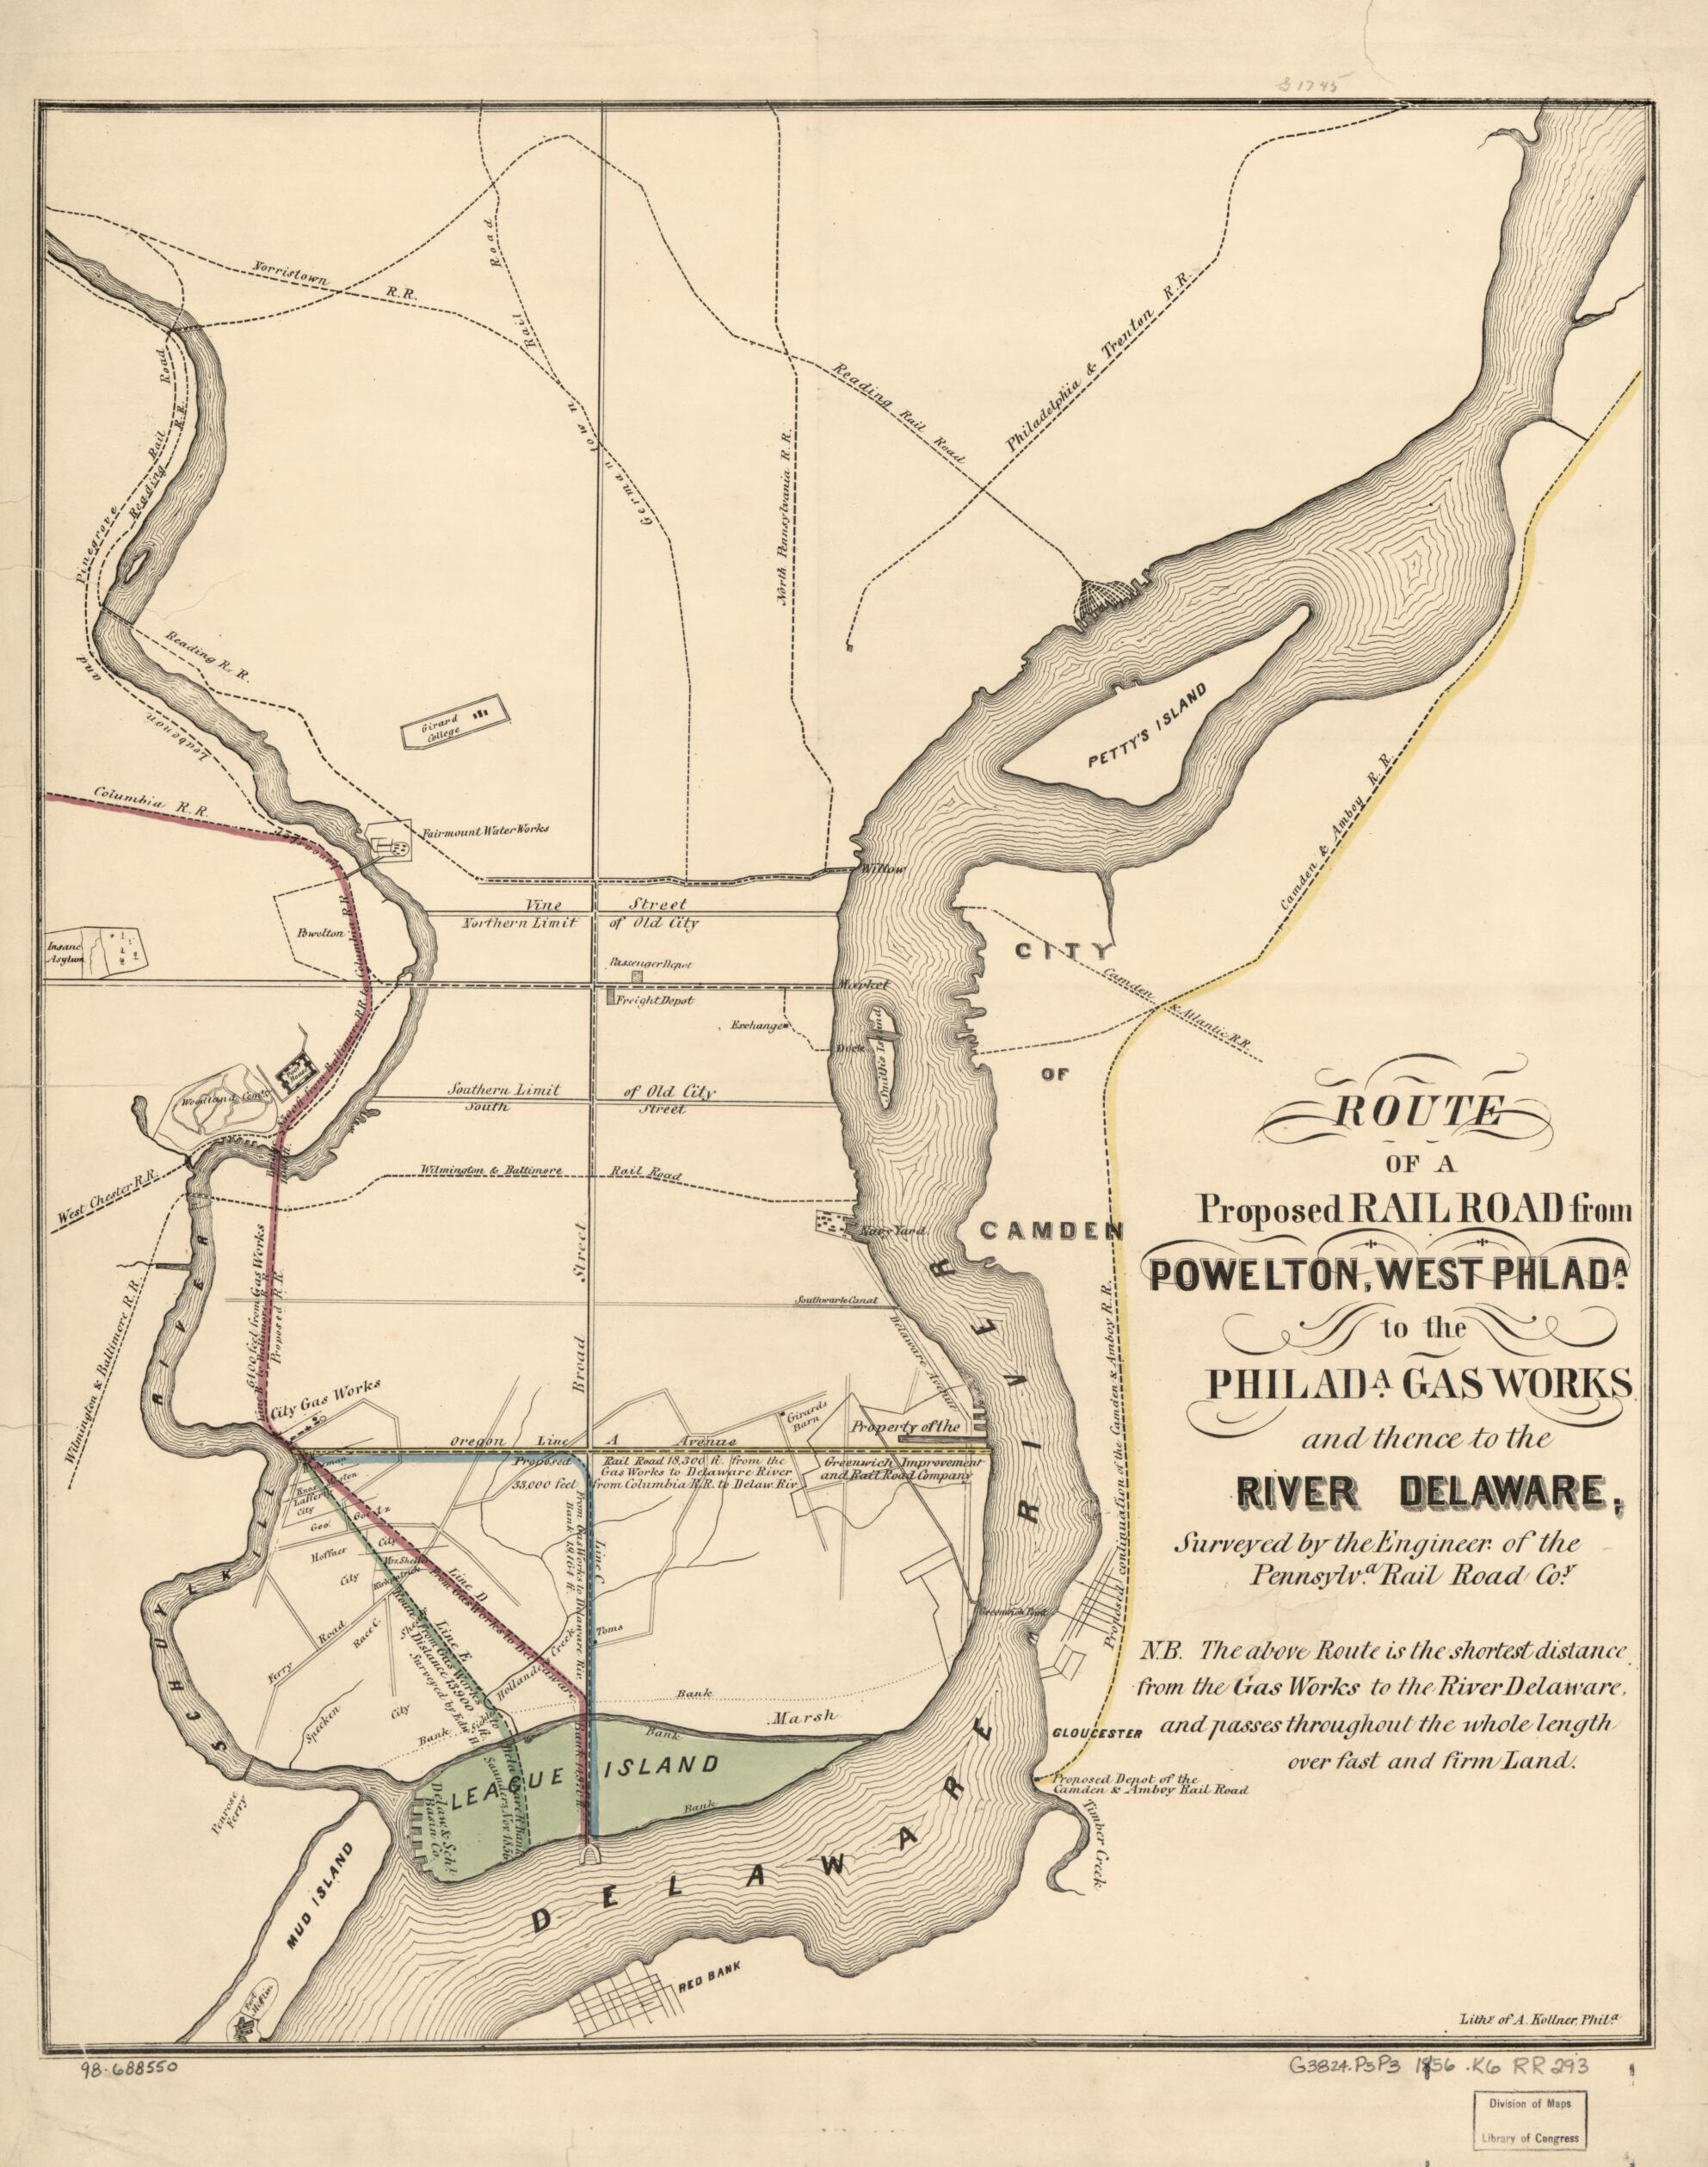 This old map of Route of a Proposed Railroad from Powelton, West Philad&